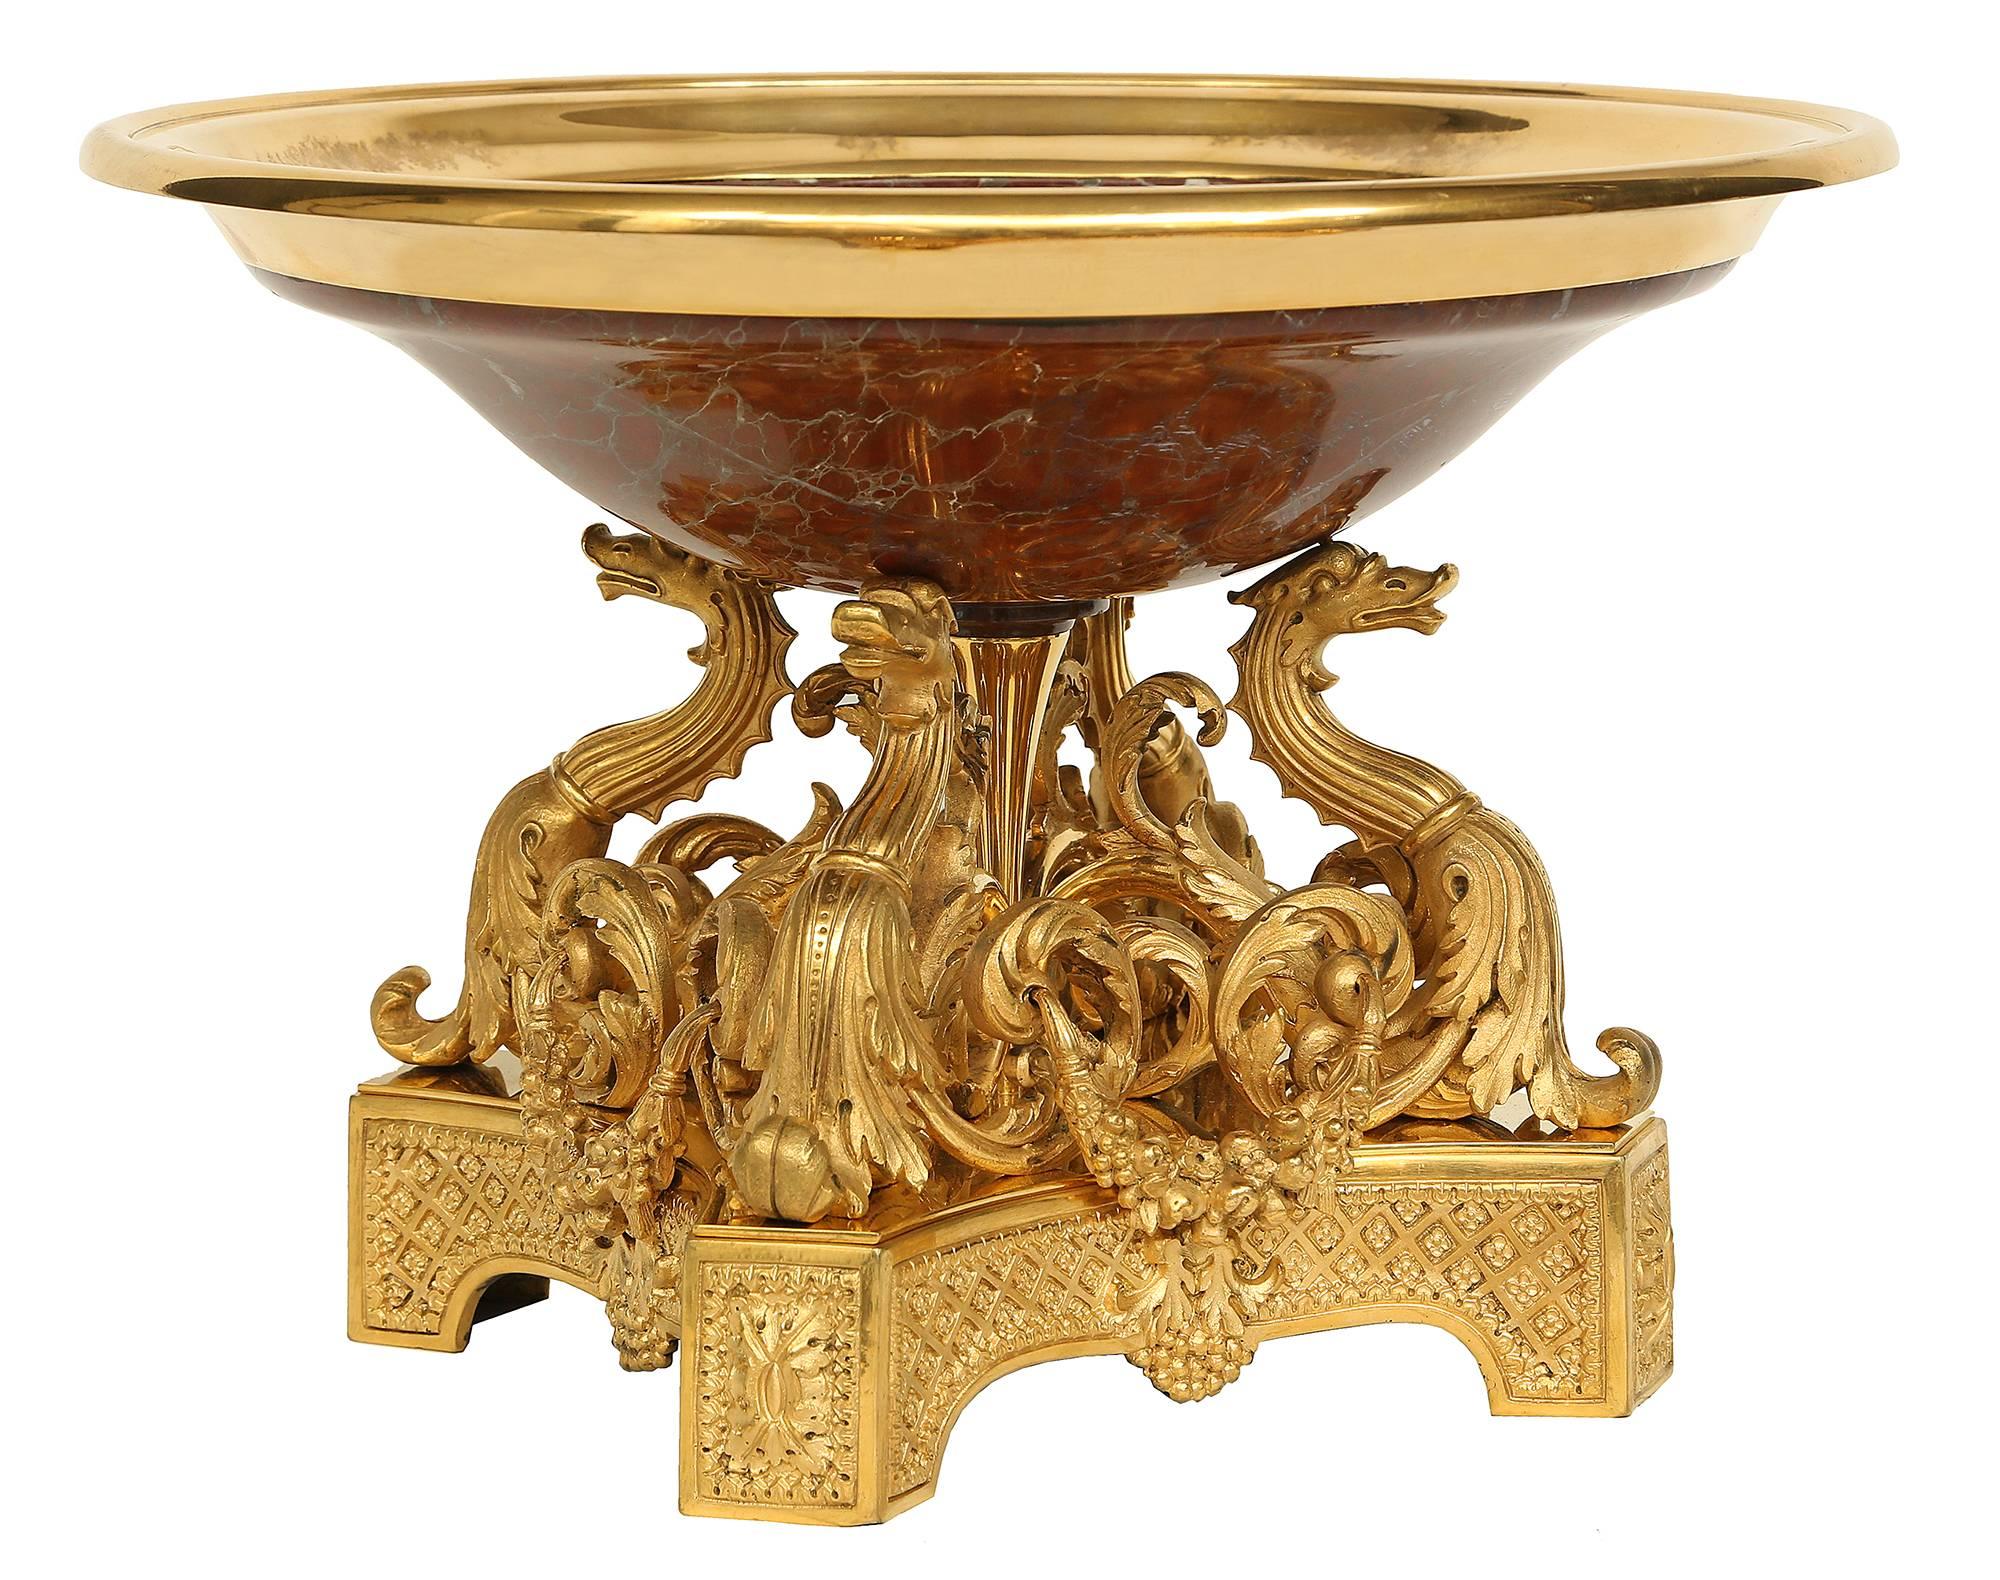 An extremely high quality French 19th century Renaissance style ormolu and marble centerpiece. The centerpiece is raised on square base with concave corners and square feet, each displaying richly chased rosettes in a satin and burnished finish.